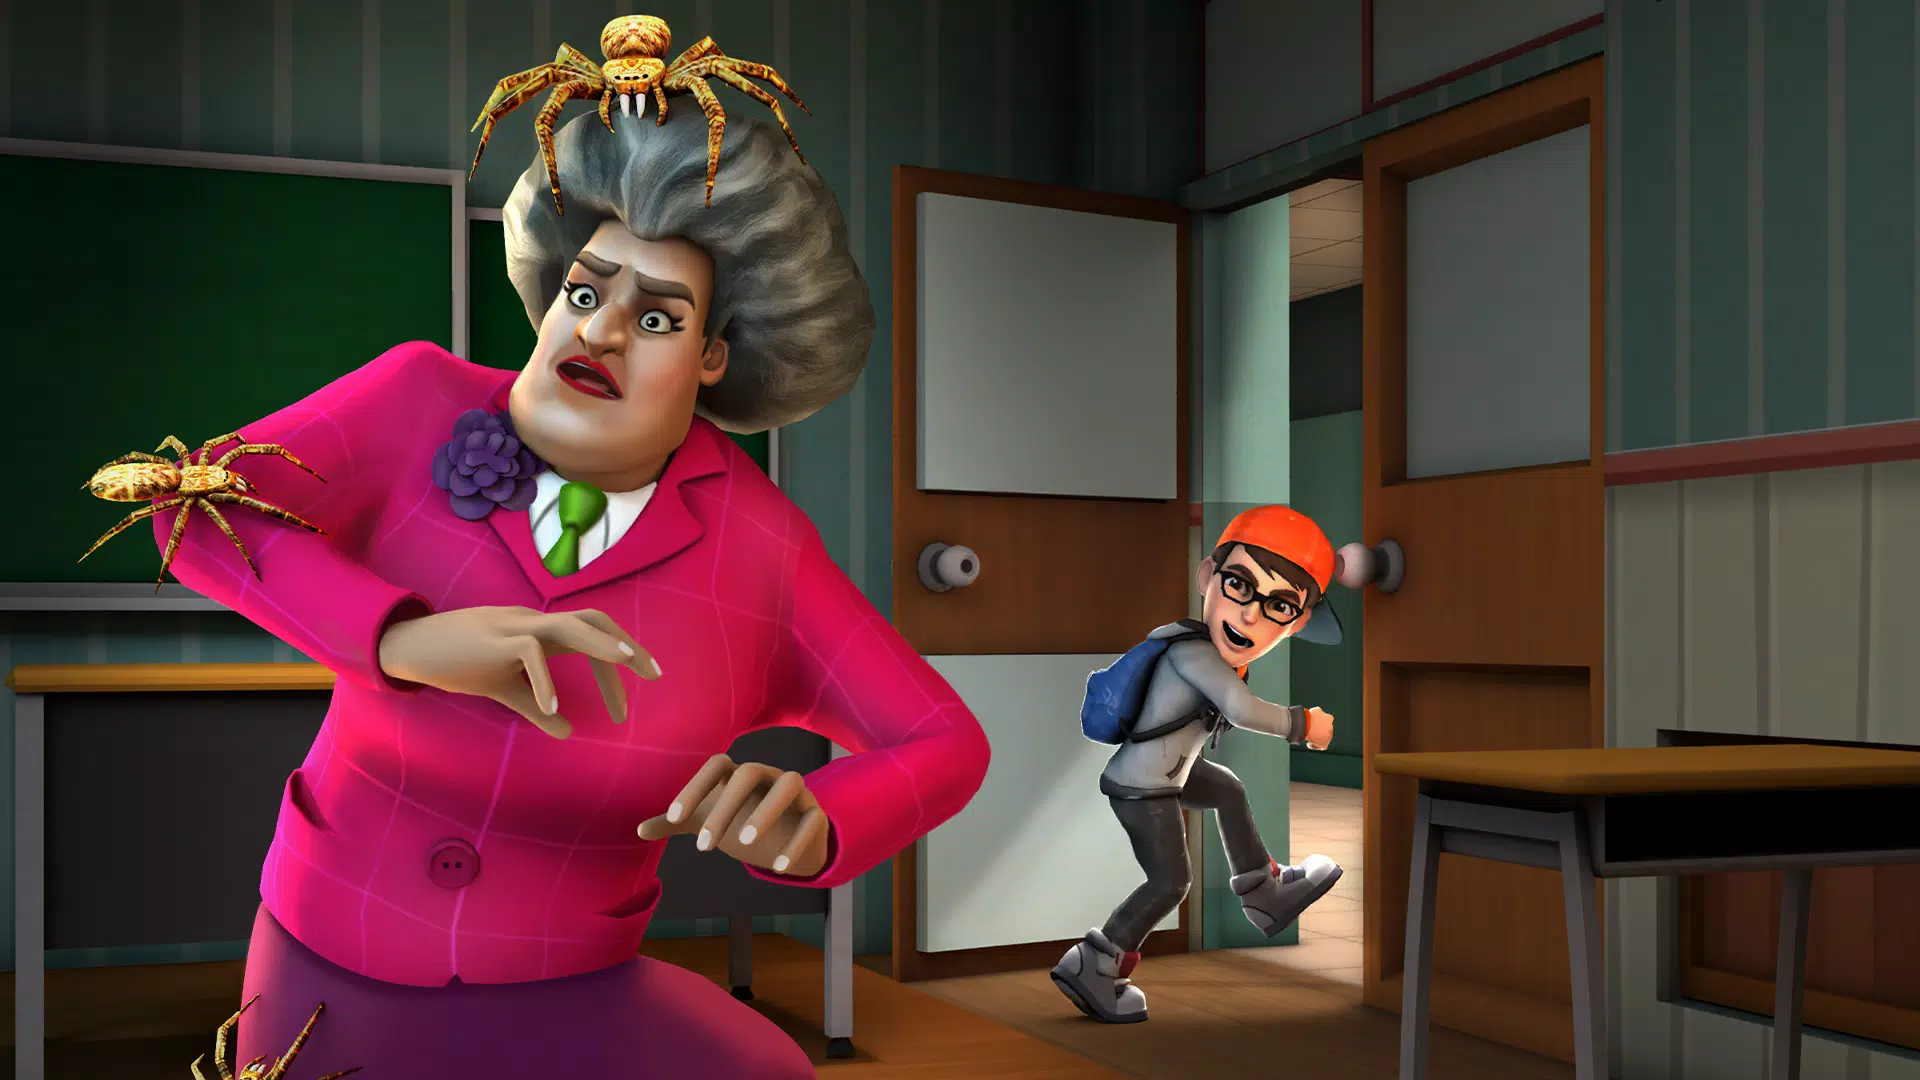 Scary Teacher 3D - OLD VERSION - Miss T Get Pranked - Android & iOS Game 